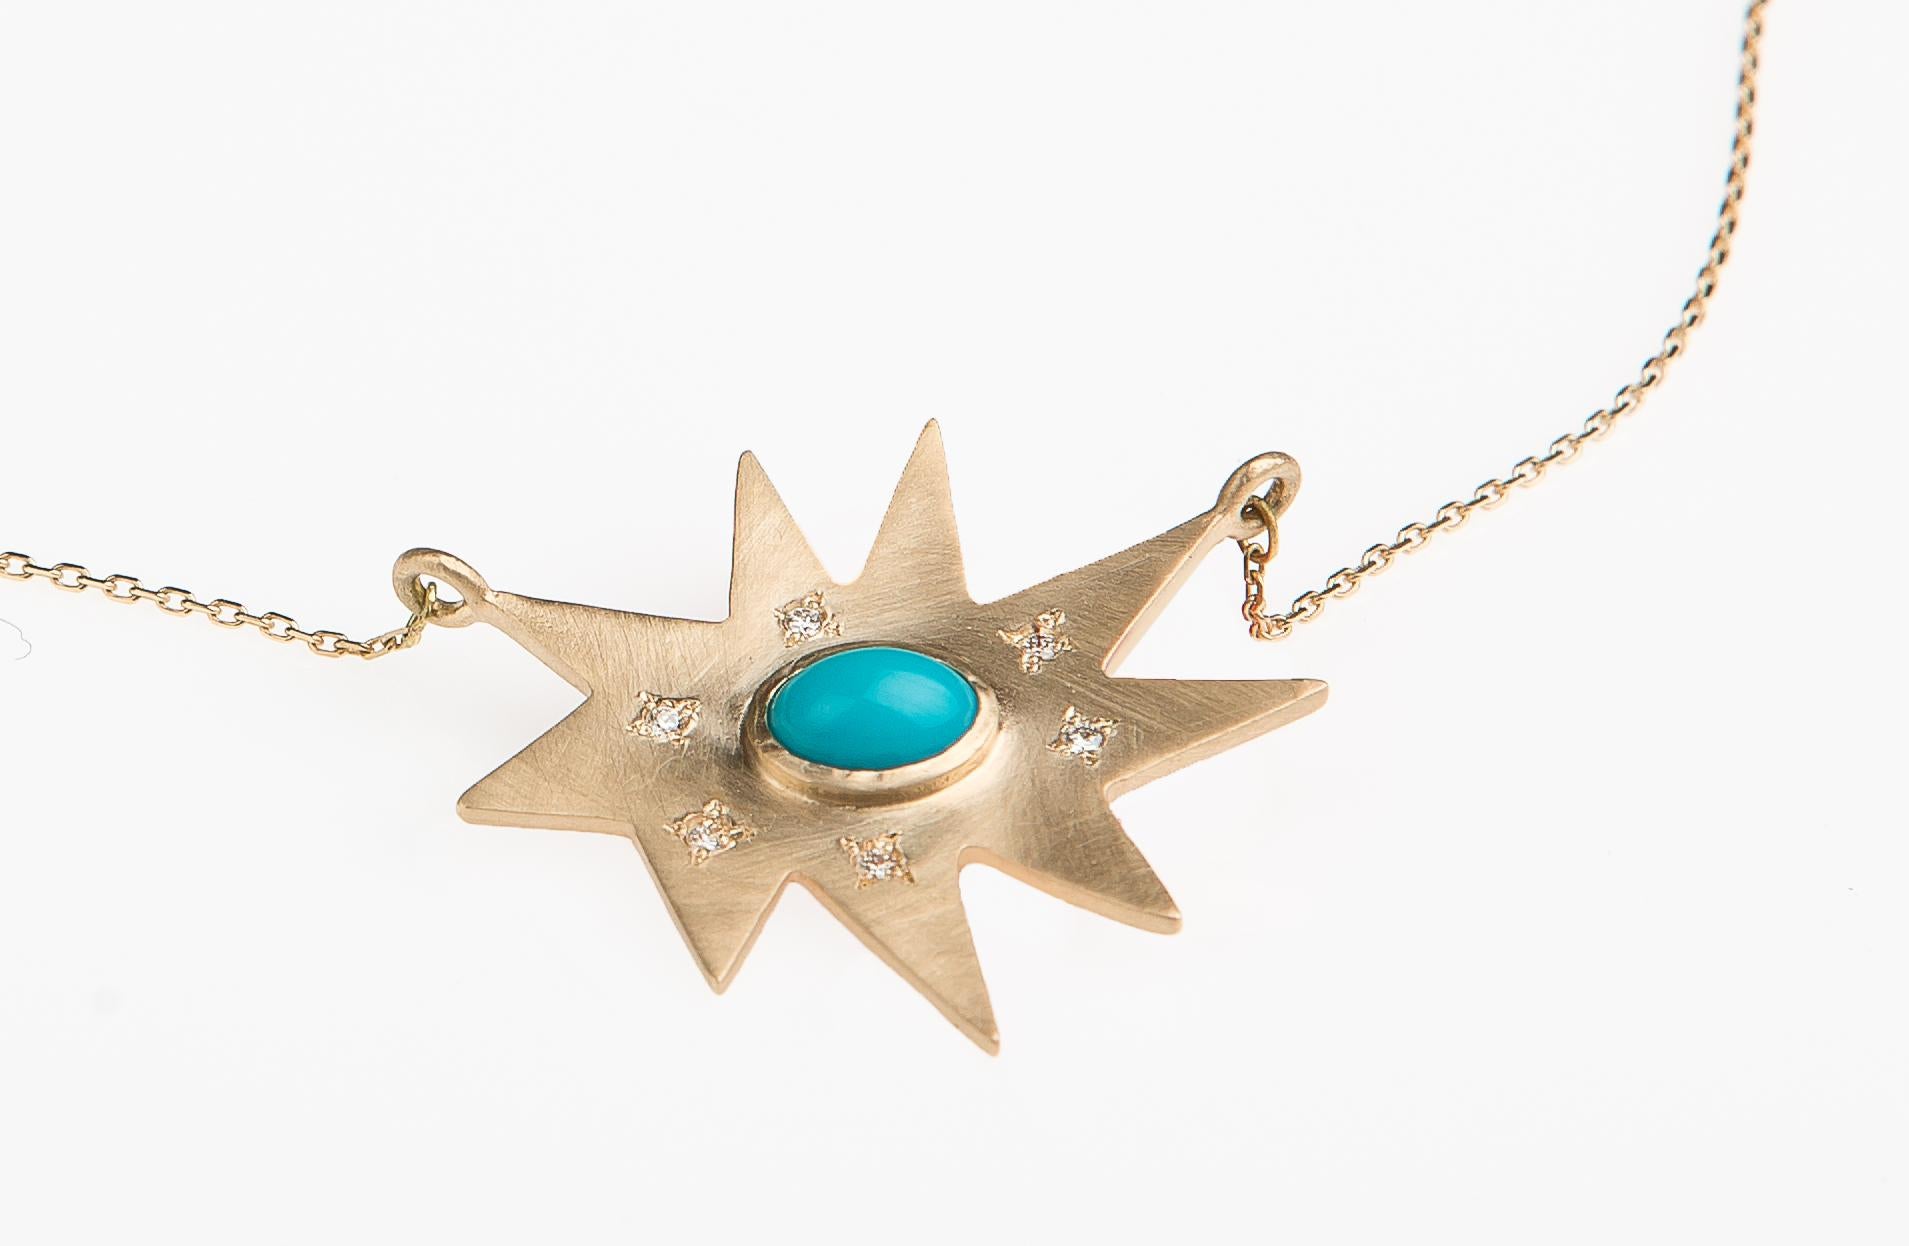 Women's Emily Kuvin Gold Organic Star Pendant Necklace with Turquoise and Diamonds